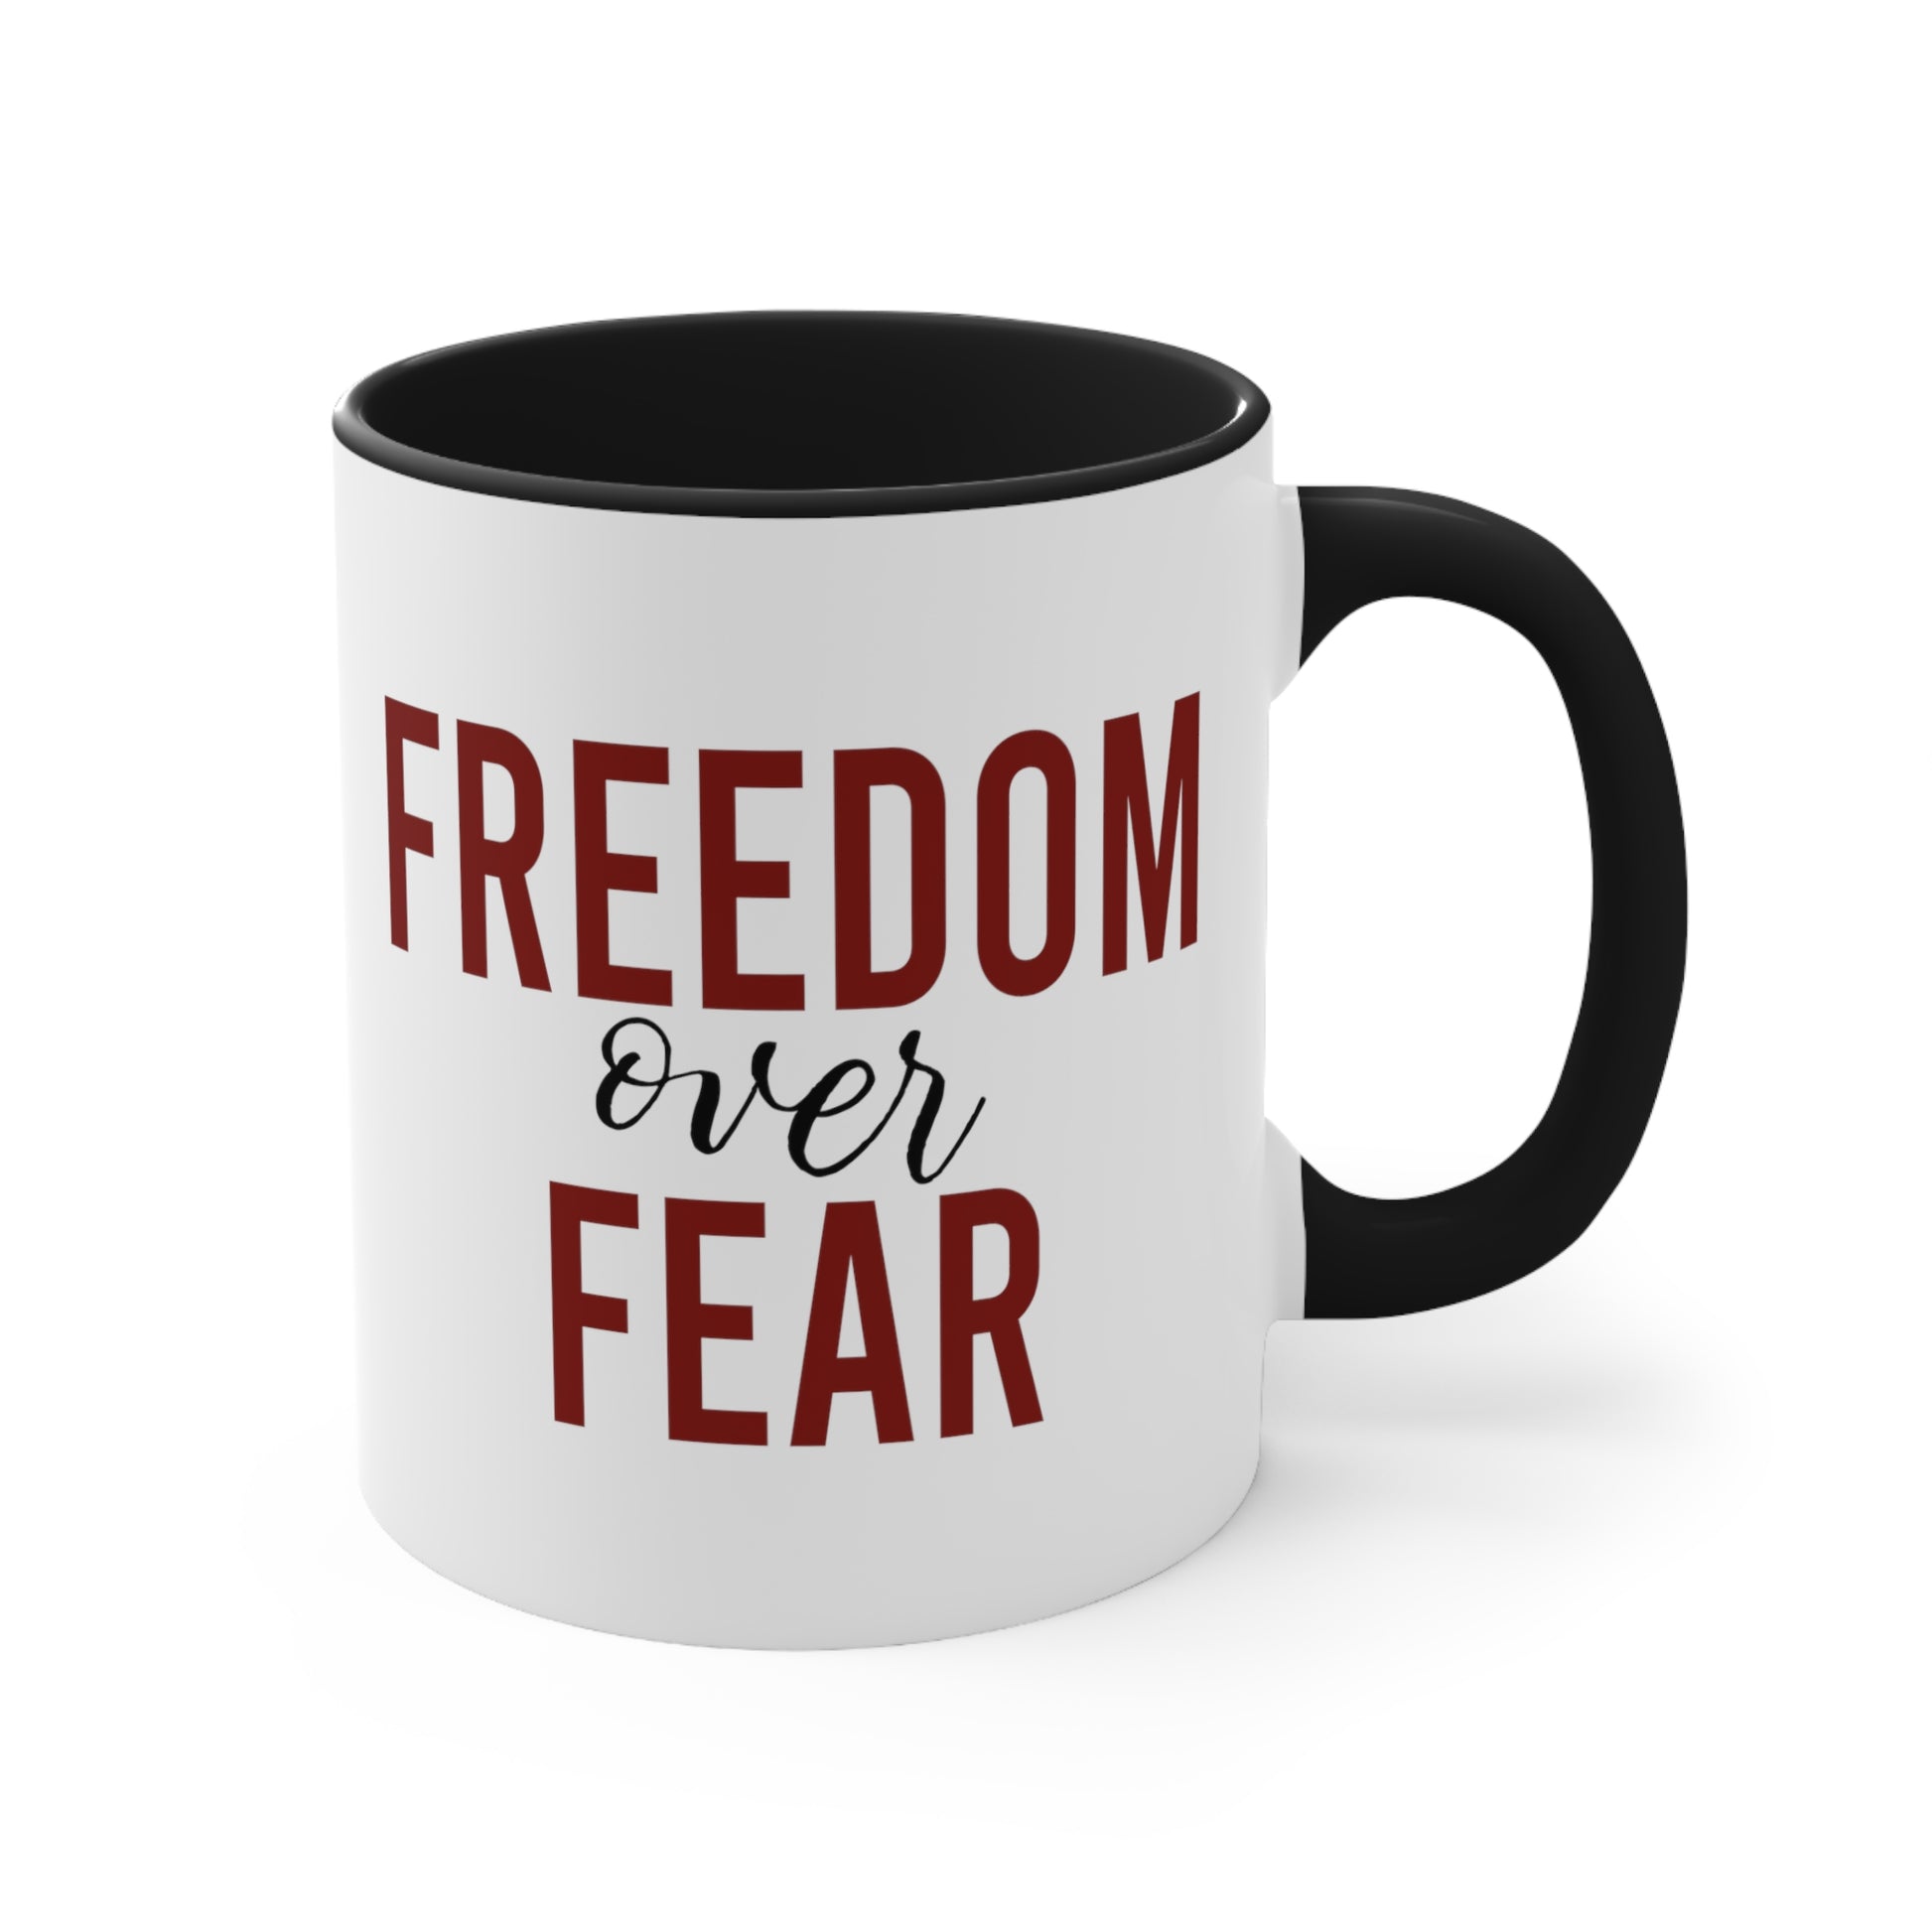 Freedom over Fear Ceramic Mug | Conservative Mug | Republican Mug | Conservative Gift | Conservative Apparel | Gift for Conservative Woman - News For Reasonable People